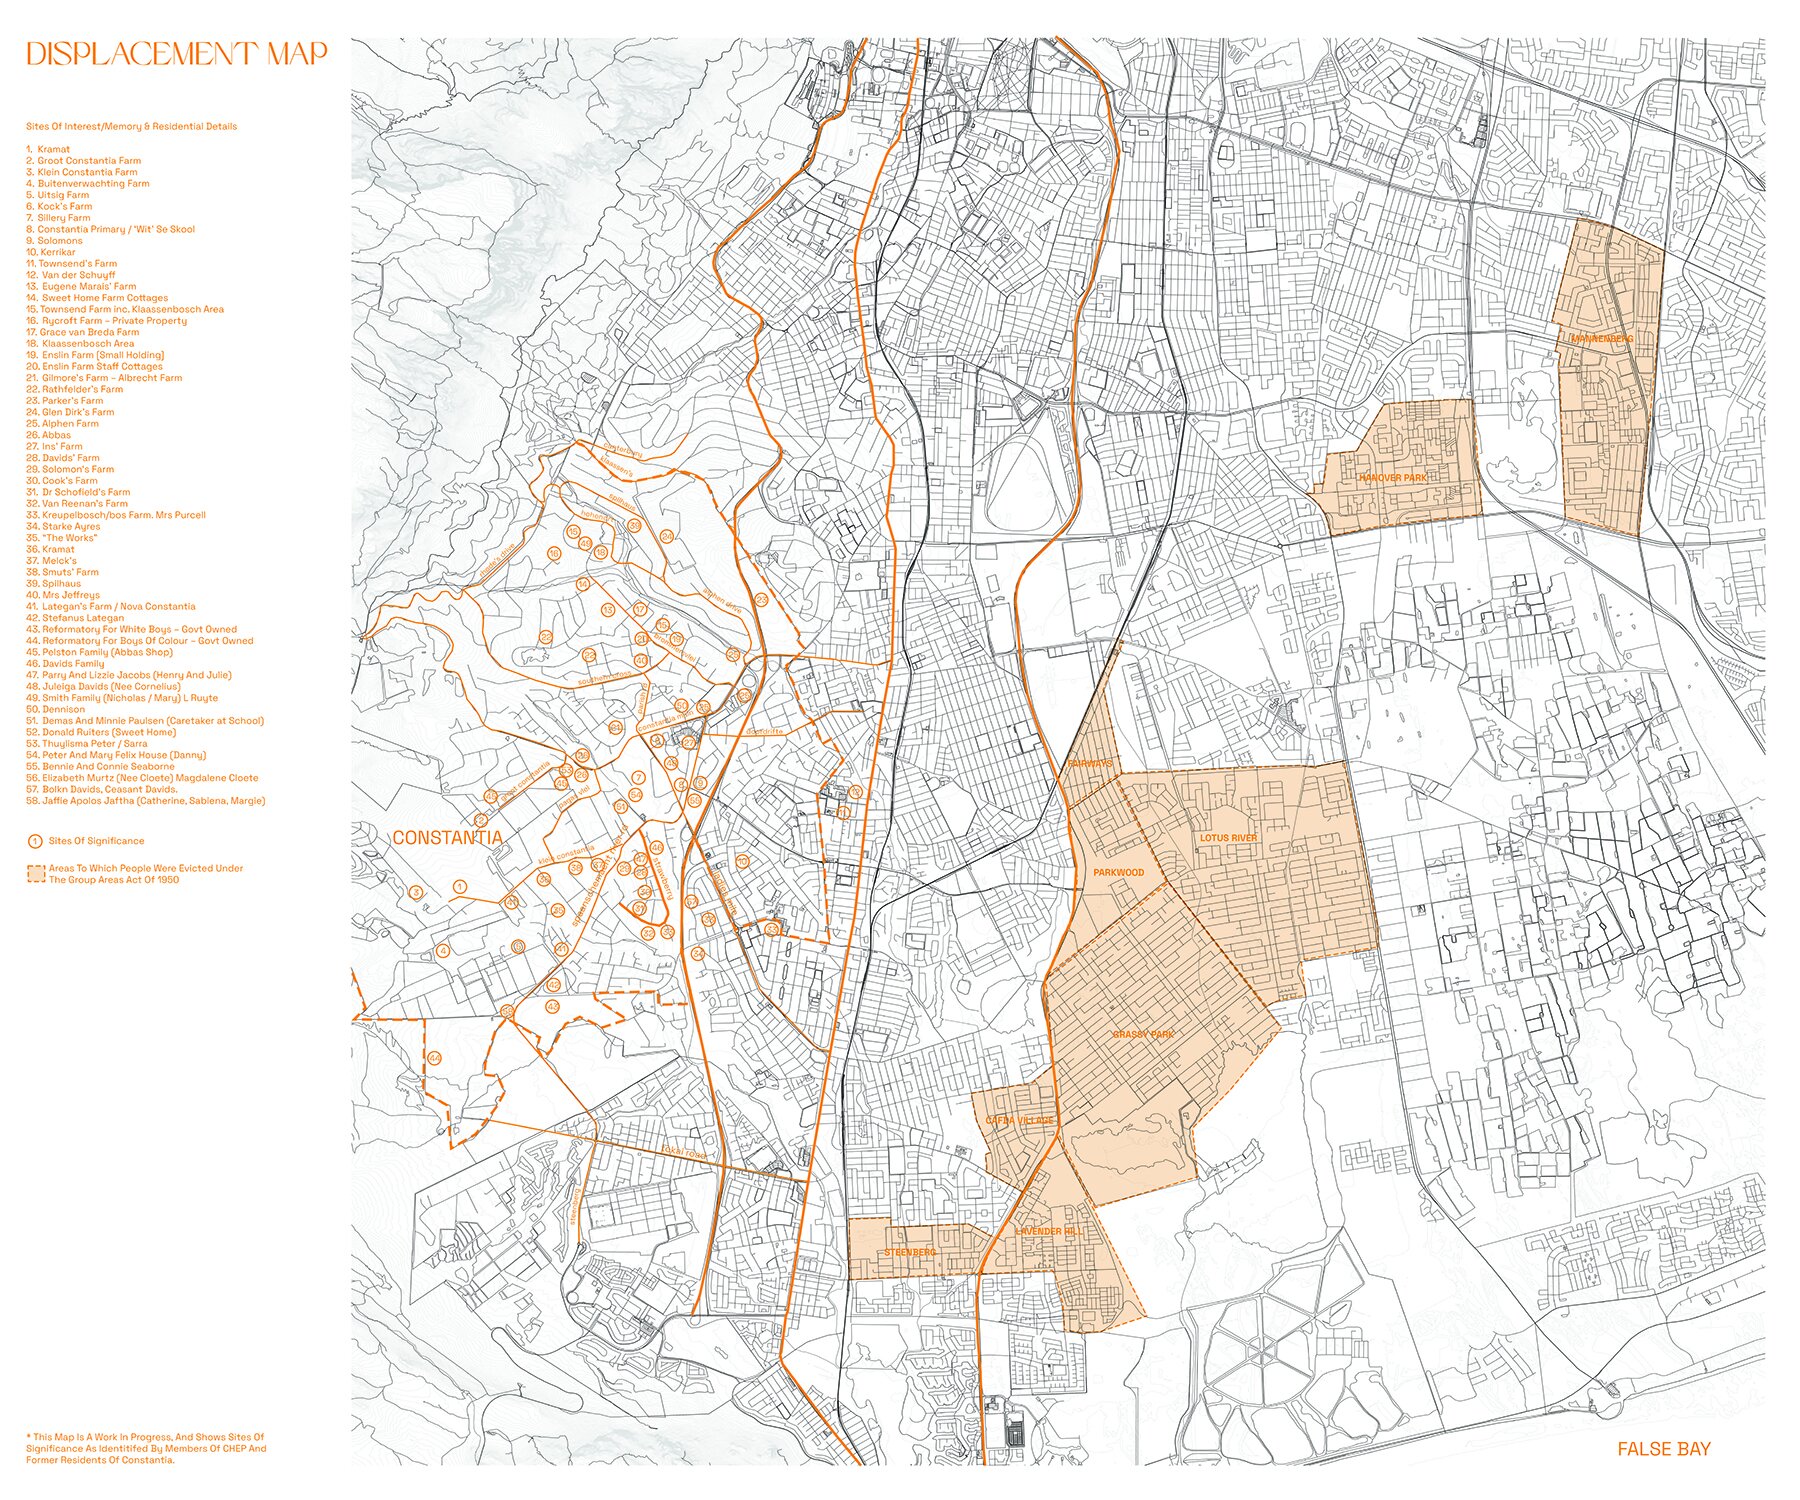  Displacement Map By Rese Boshoff  Constantia Vs Cape Flats 